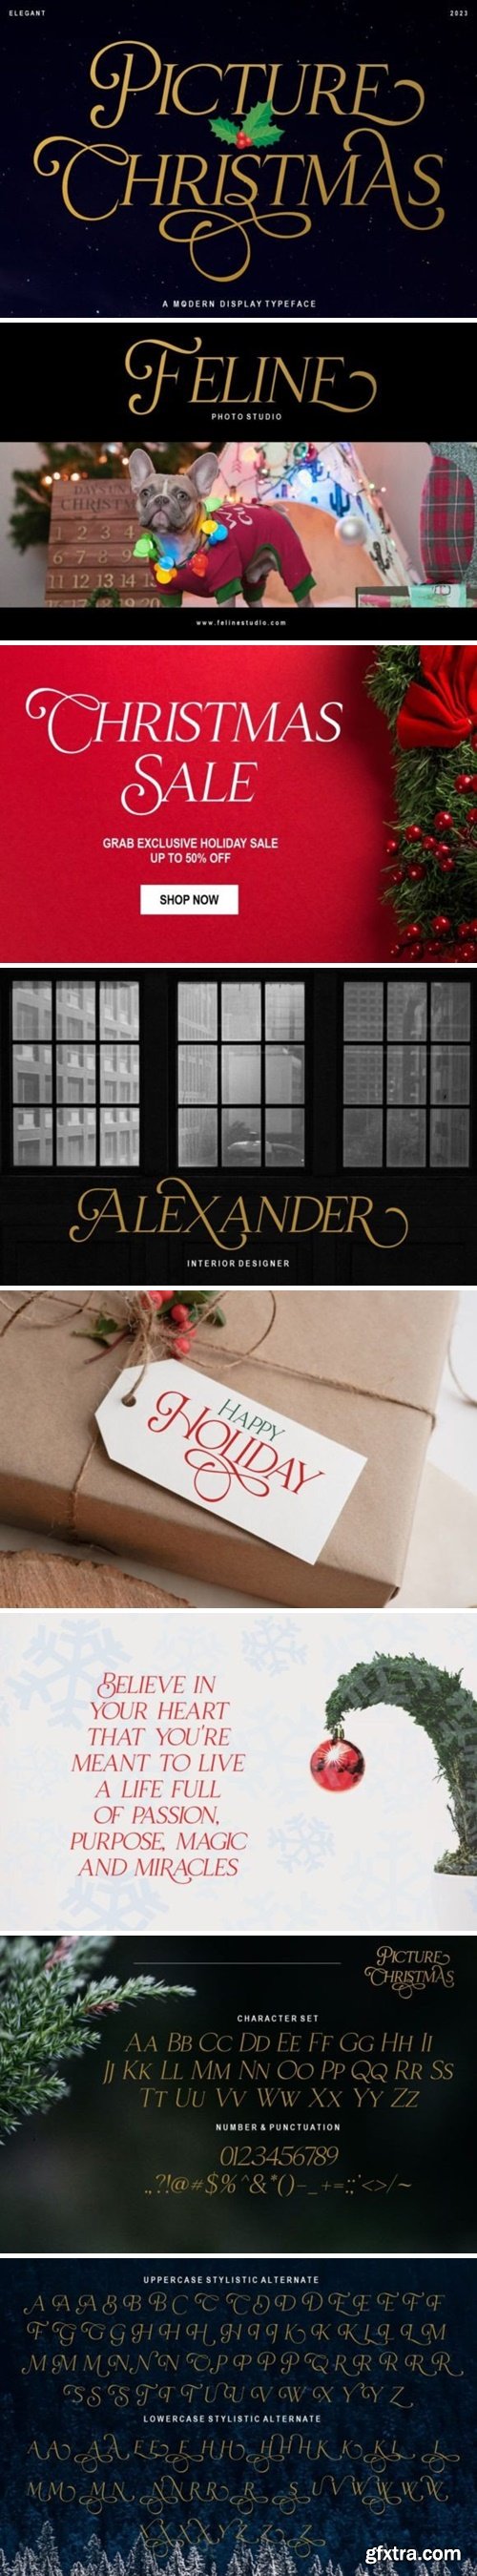 Christmas Picture Font